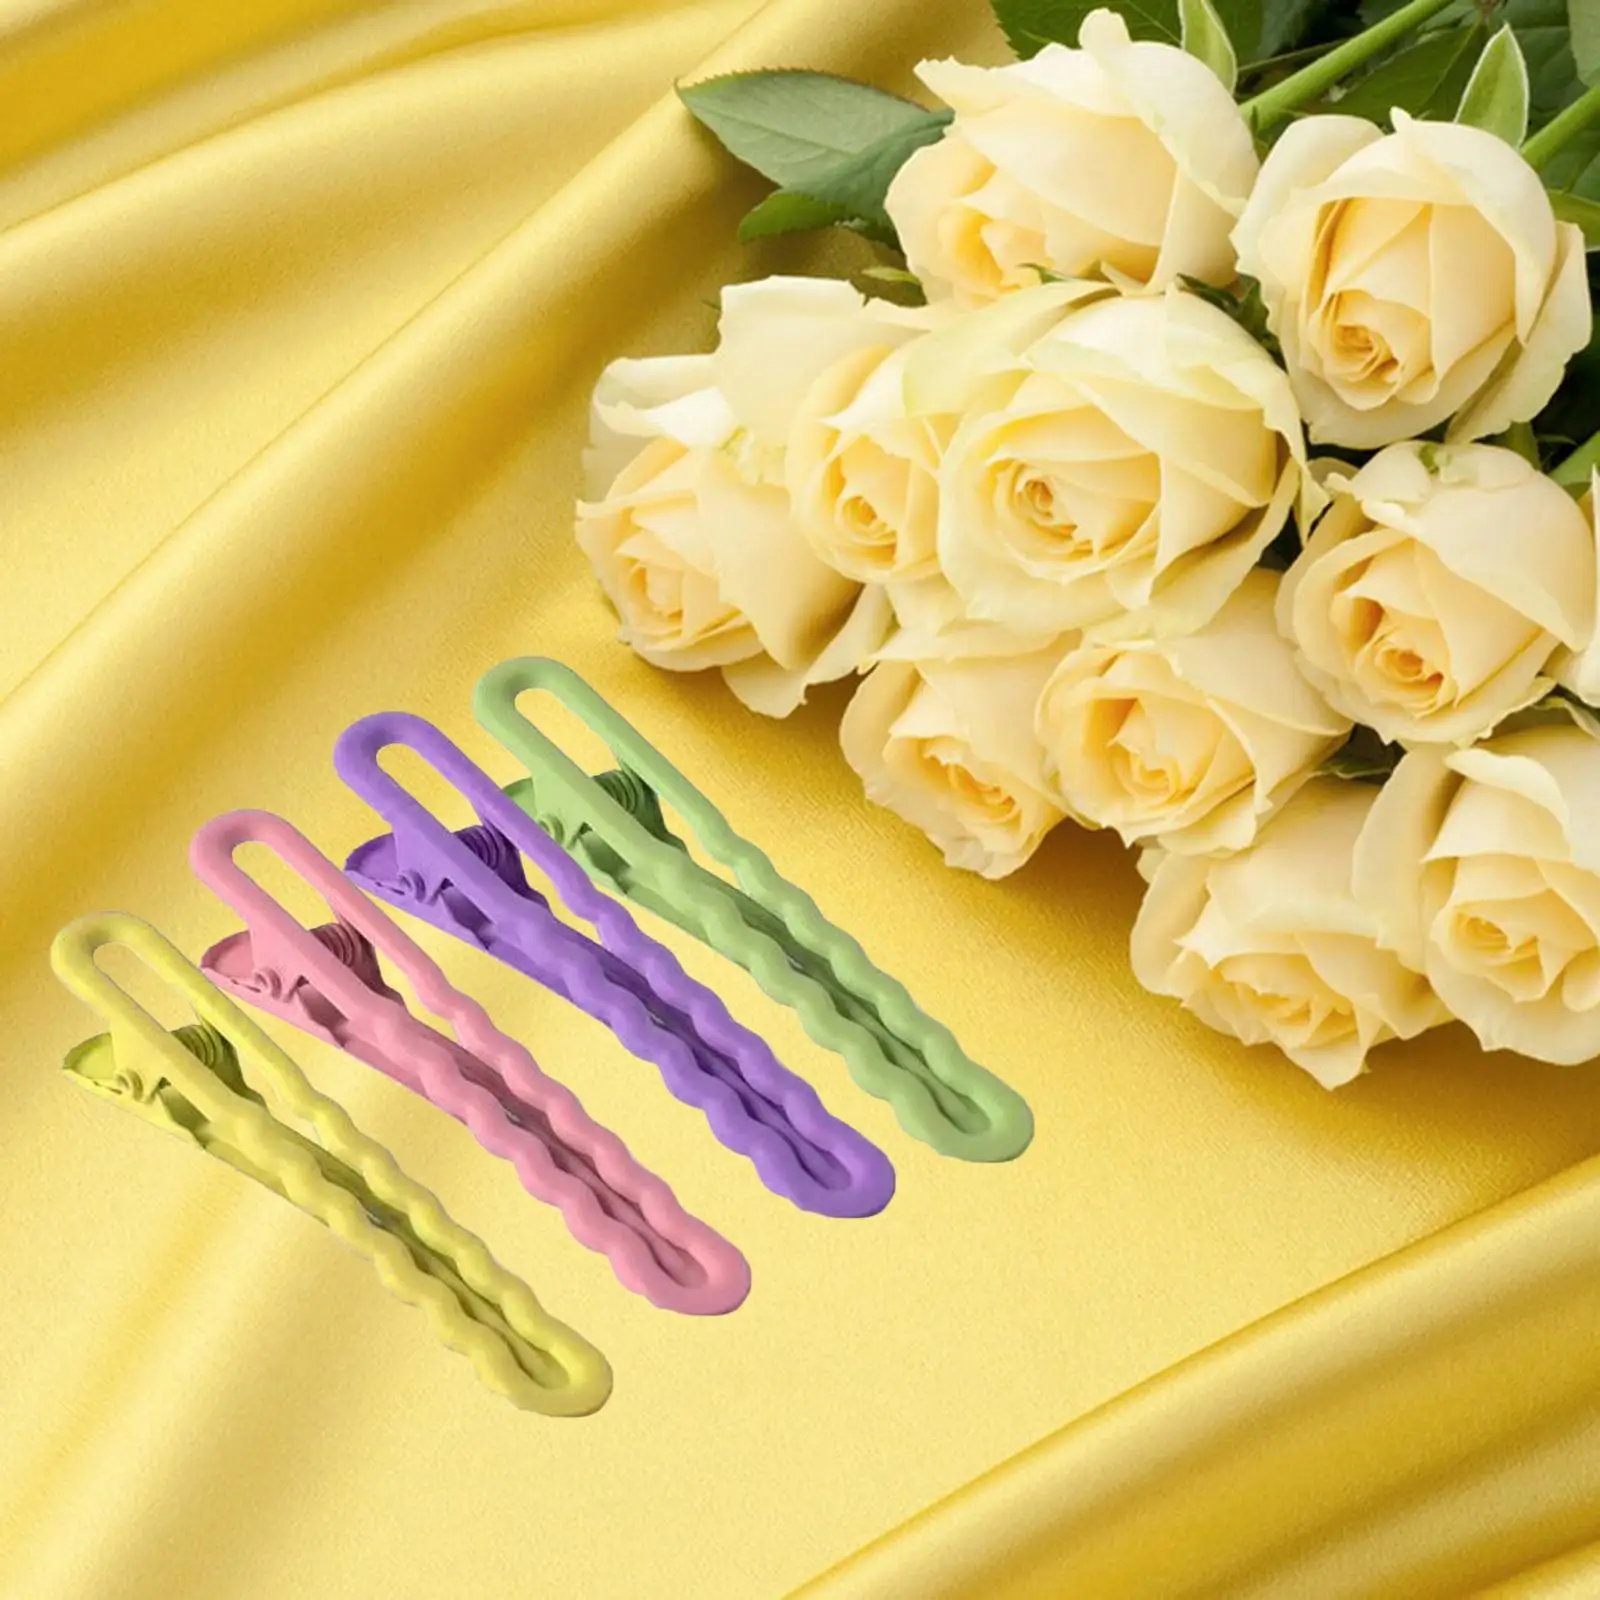 4Pcs Snap Hair Pins Metal Barrettes Cute Candy Color Tool Cream Hair Clips for Women Girls Party Wedding Gift